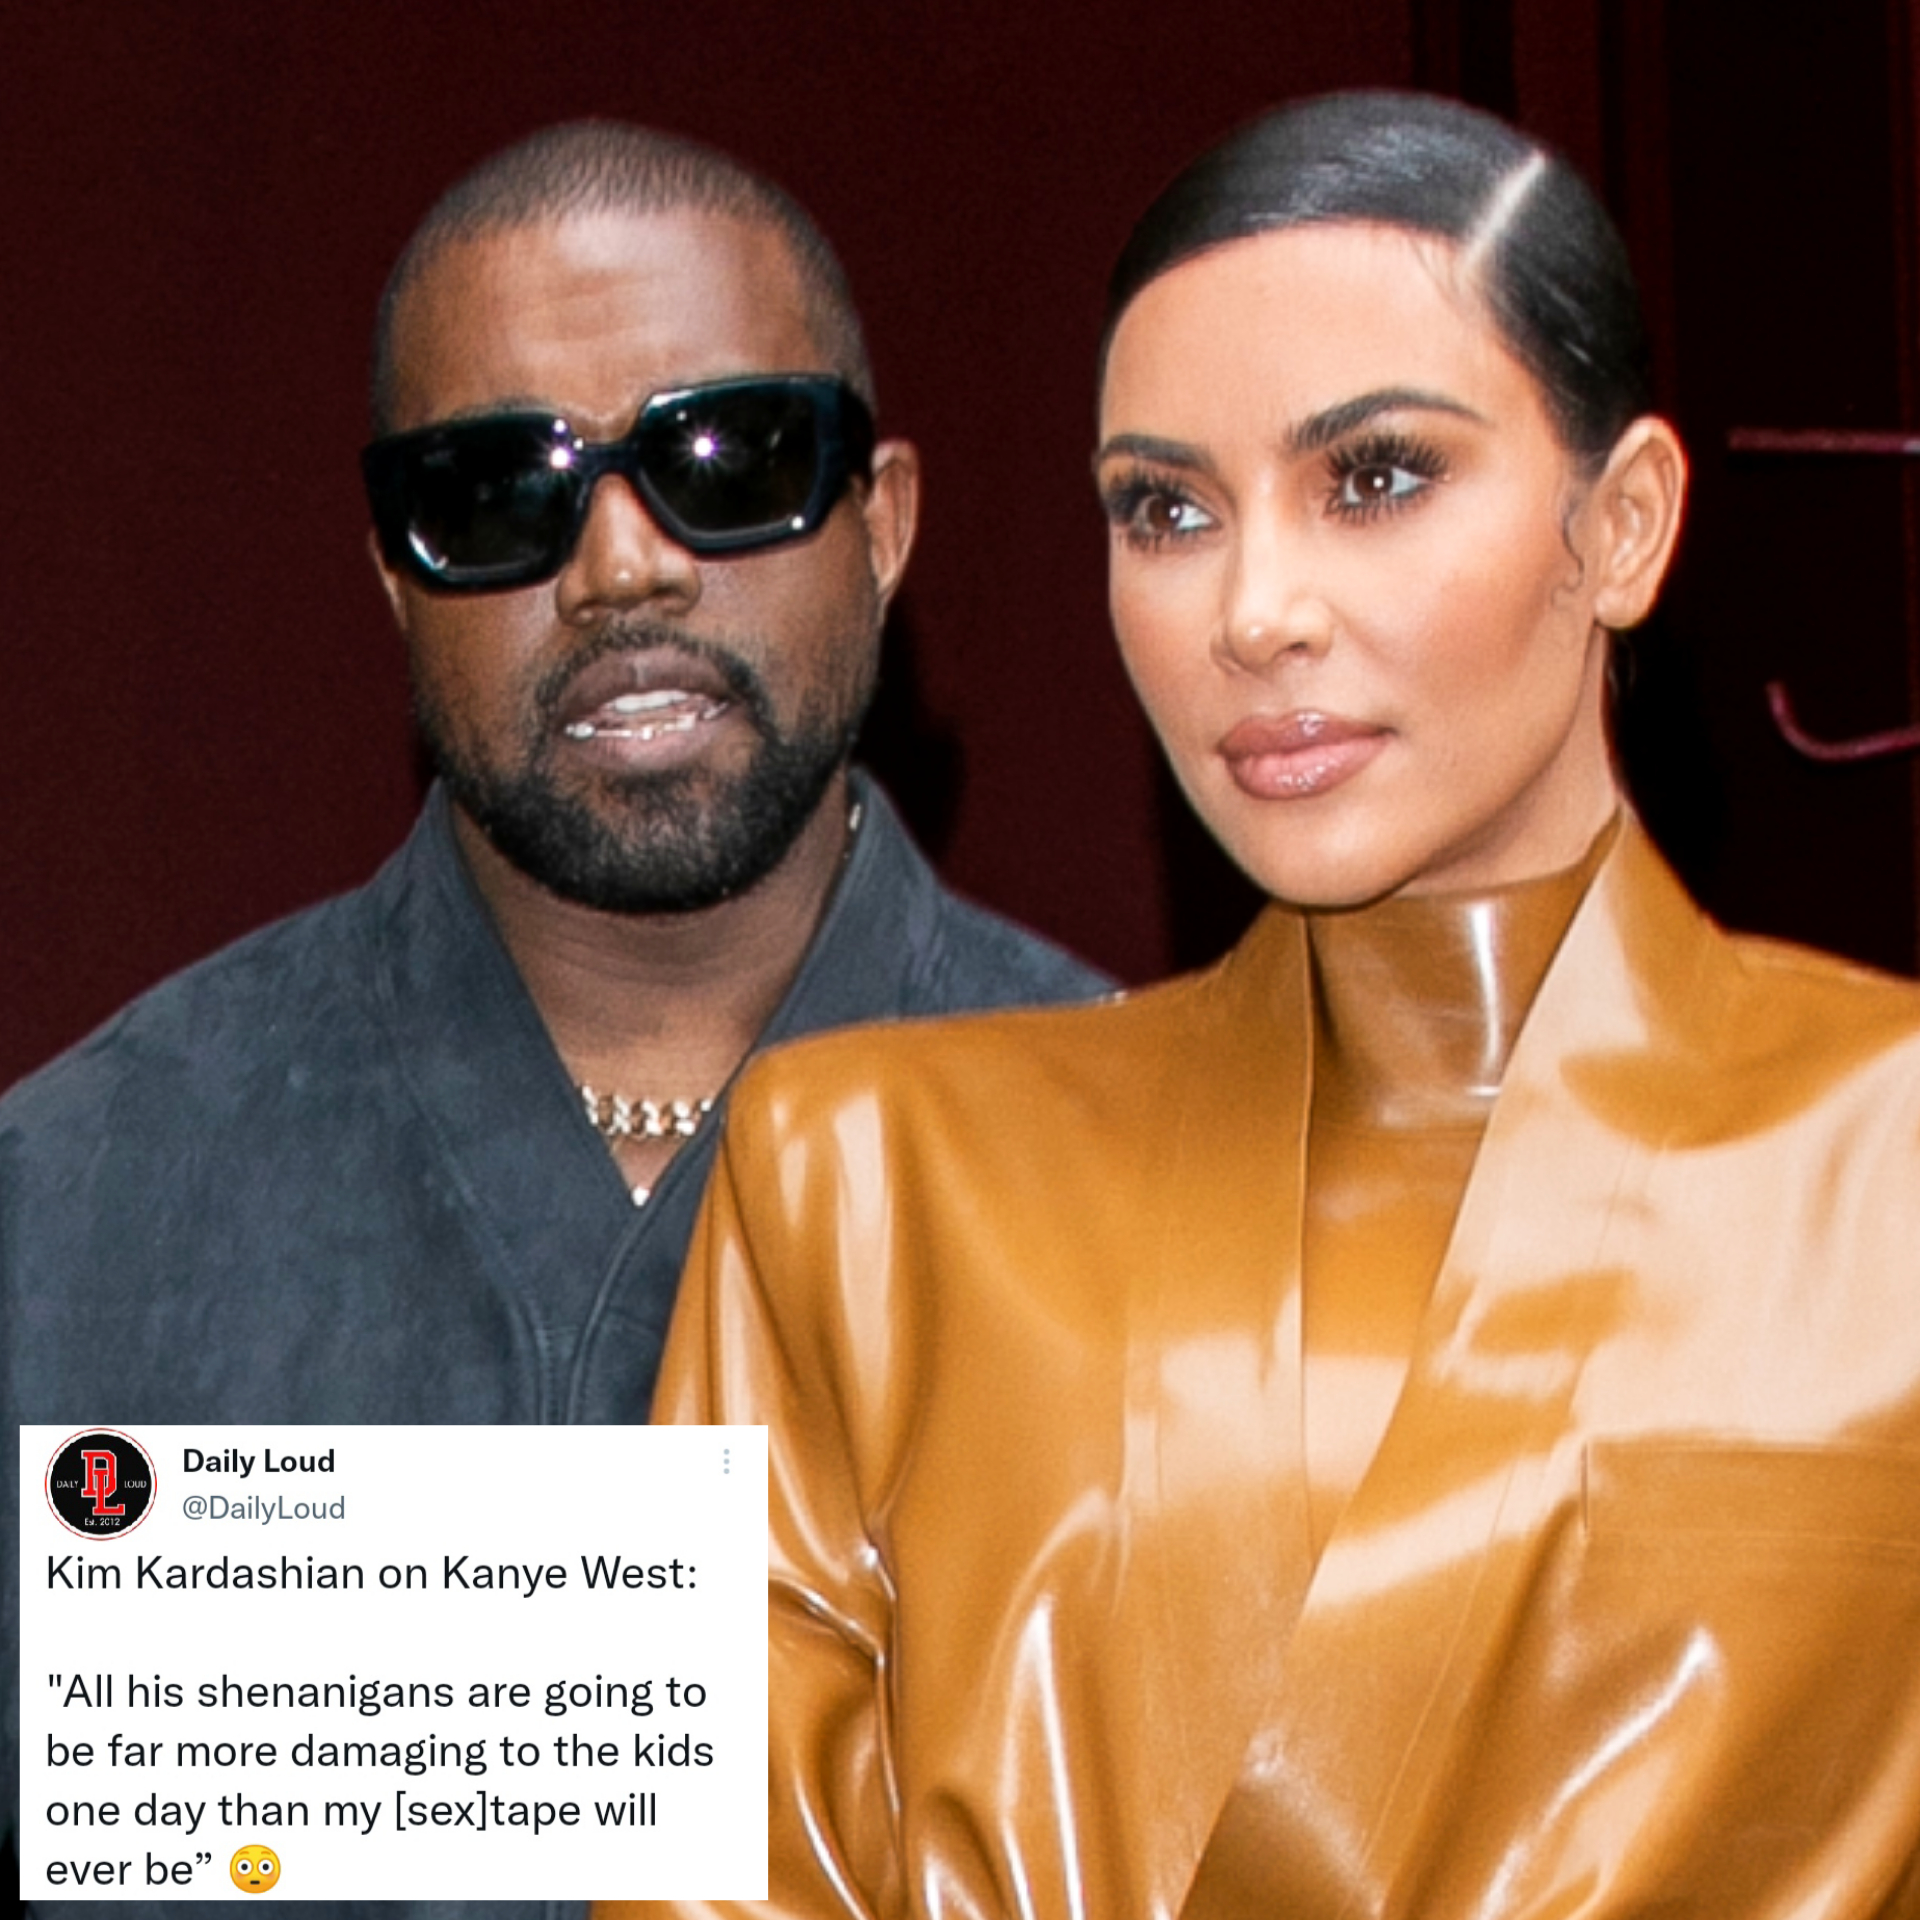 Kim Kardashian Reveals How Issues With Kanye Will D@mage Their Kids